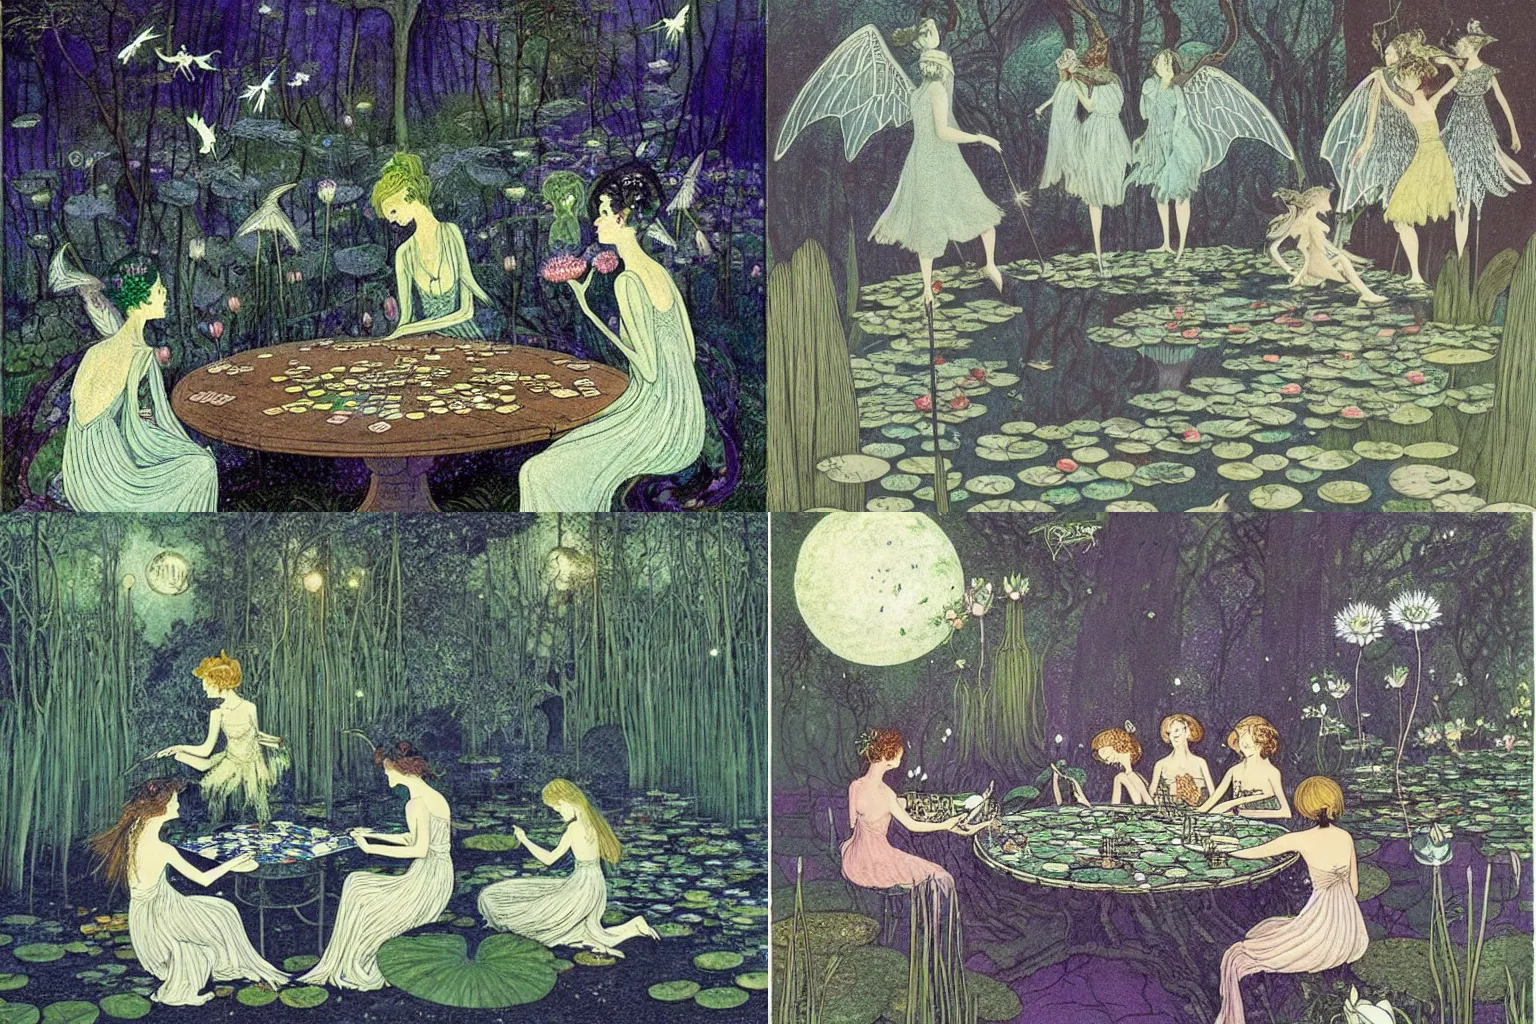 Prompt: a group of gracious fairies with wings playing cards on a table in an atmospheric moonlit forest next to a beautiful pond filled with water lilies, artwork by ida rentoul outhwaite